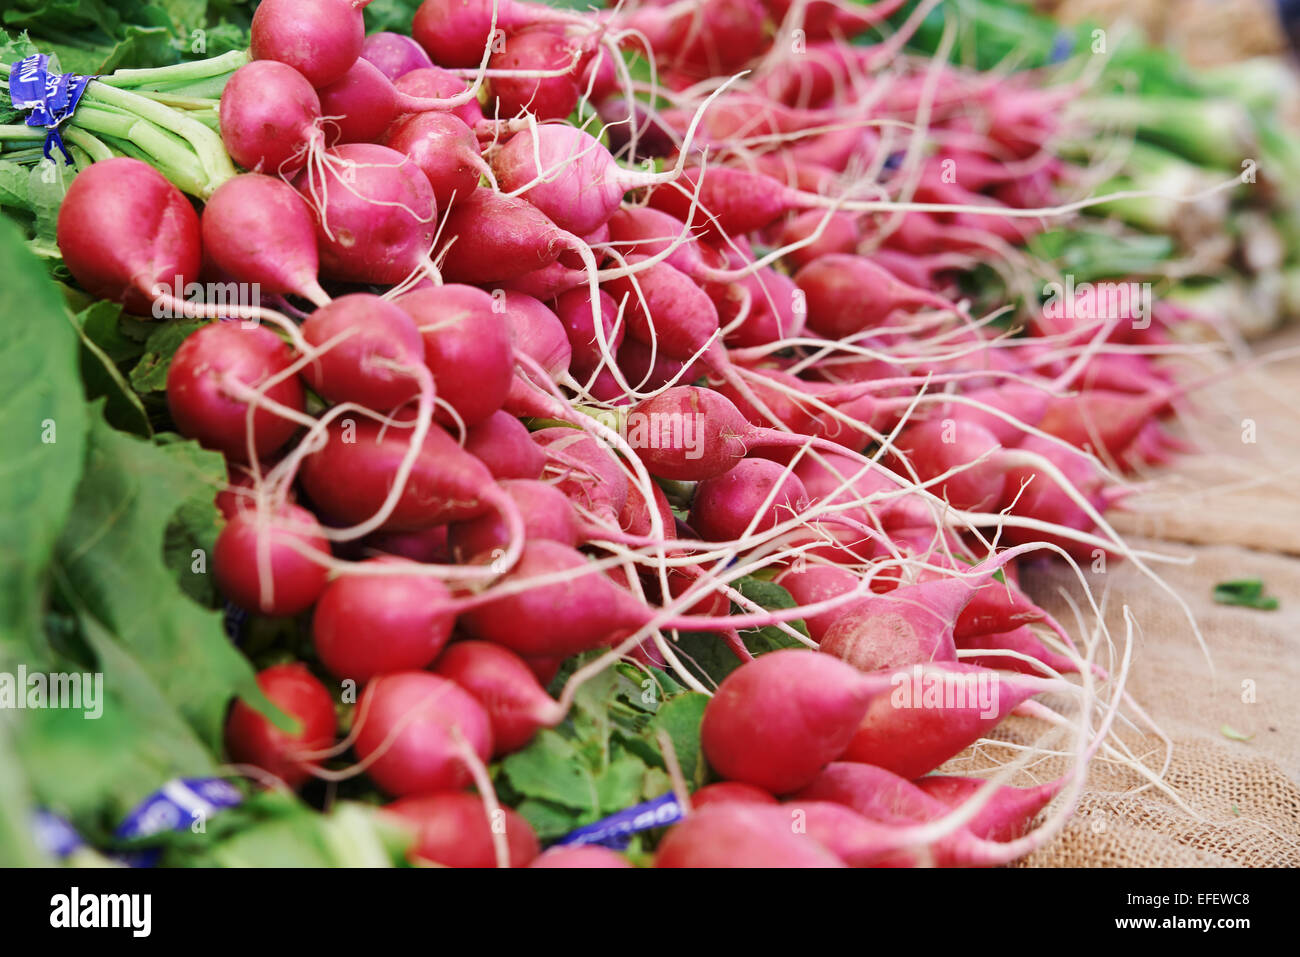 Radishes at a farmers market all lined up and shot from the side Stock Photo